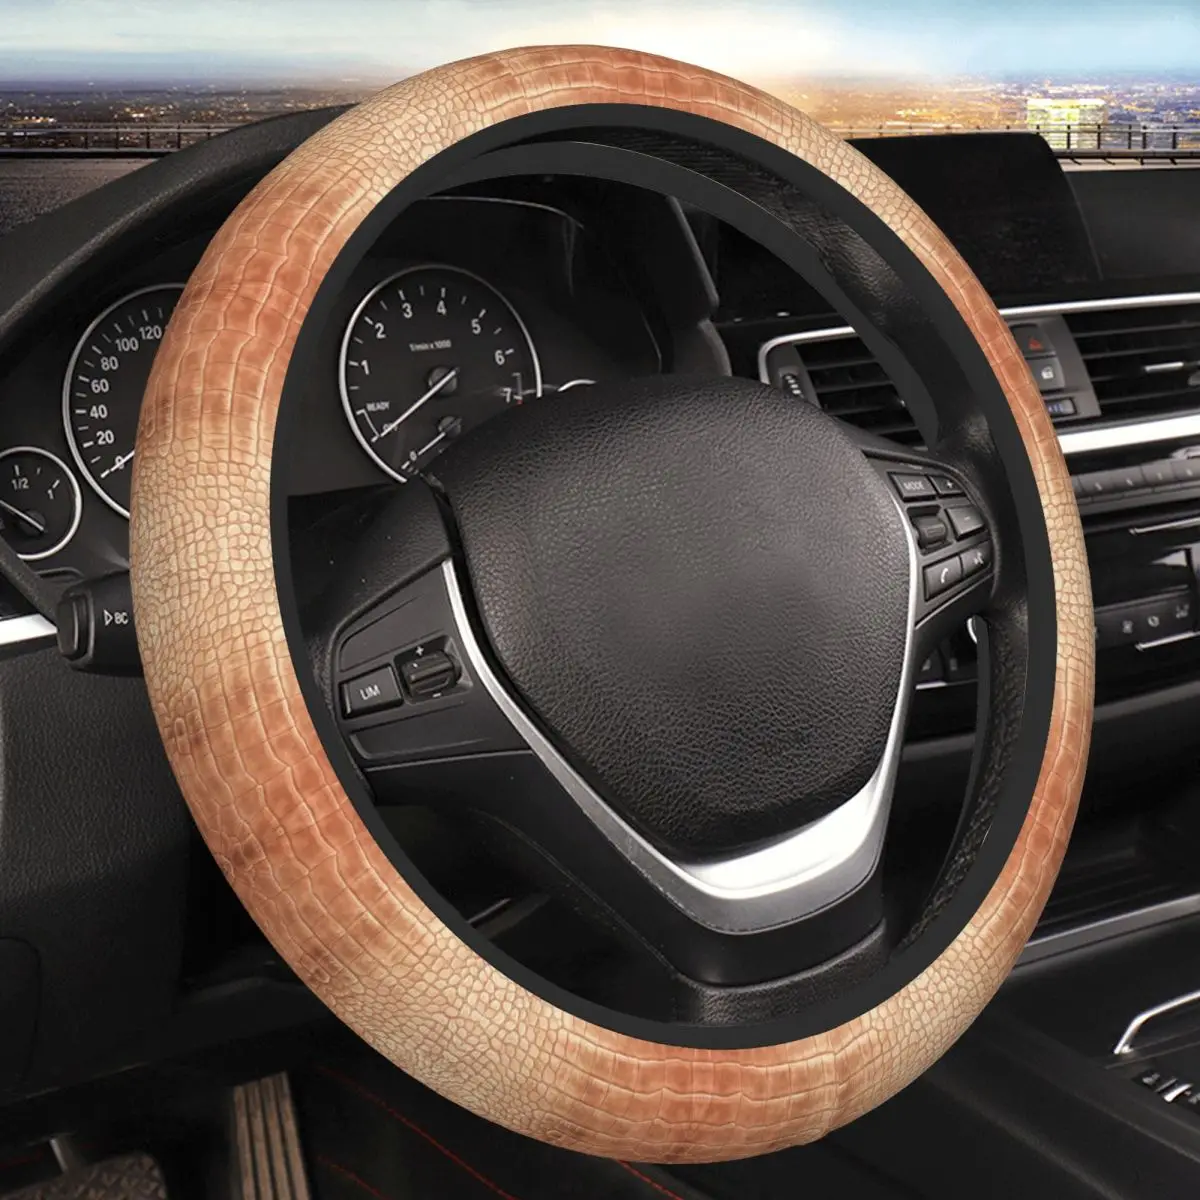 

CROCODILE LEATHER Thickening Car Steering Wheel Cover 38cm Universal Suitable Car-styling Car Accessories